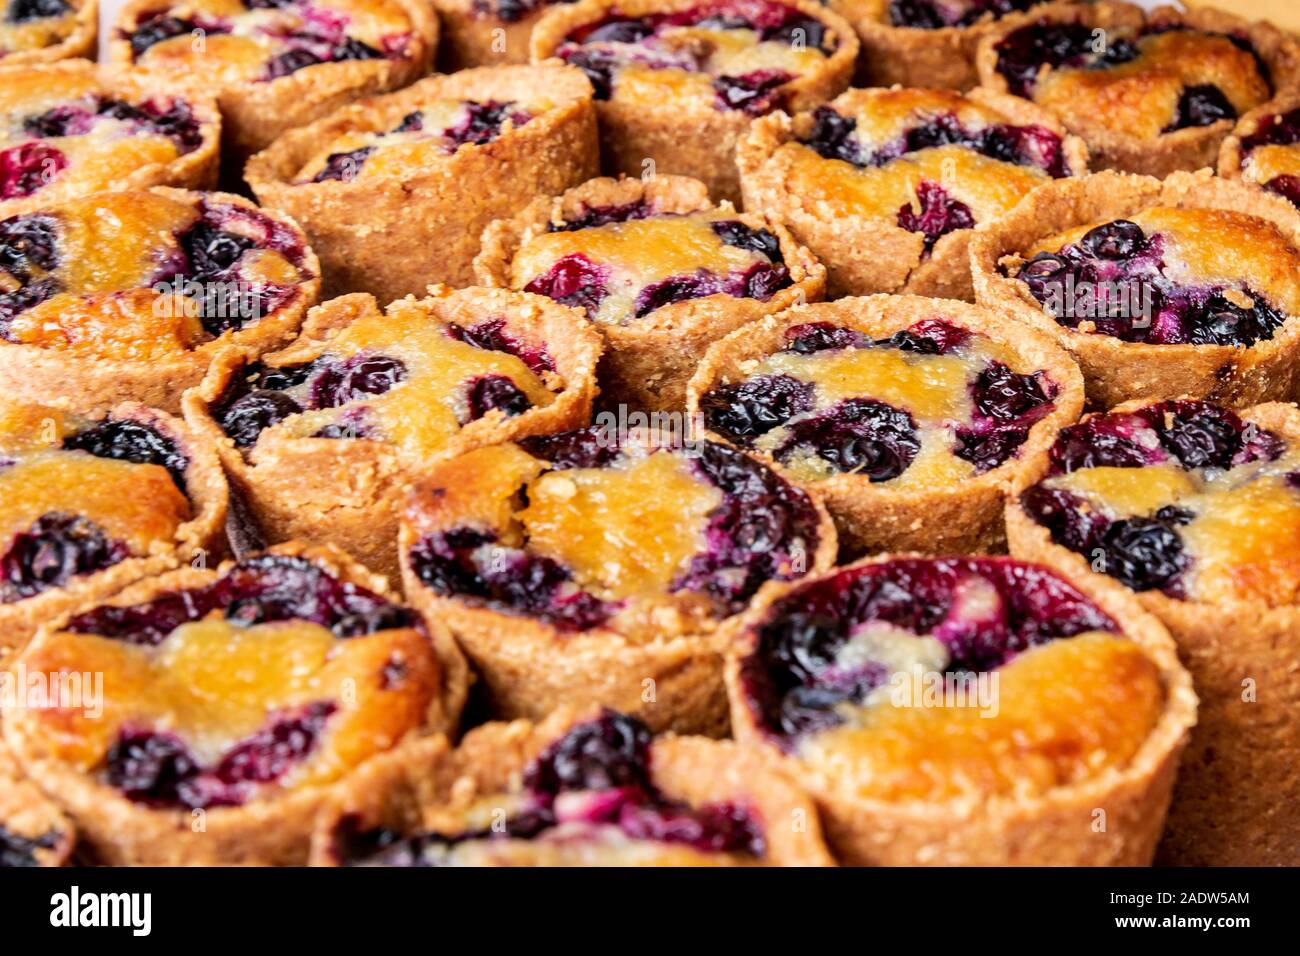 Organic tartlets of blueberries and apricots in a market of organic products. Leon, Spain Stock Photo